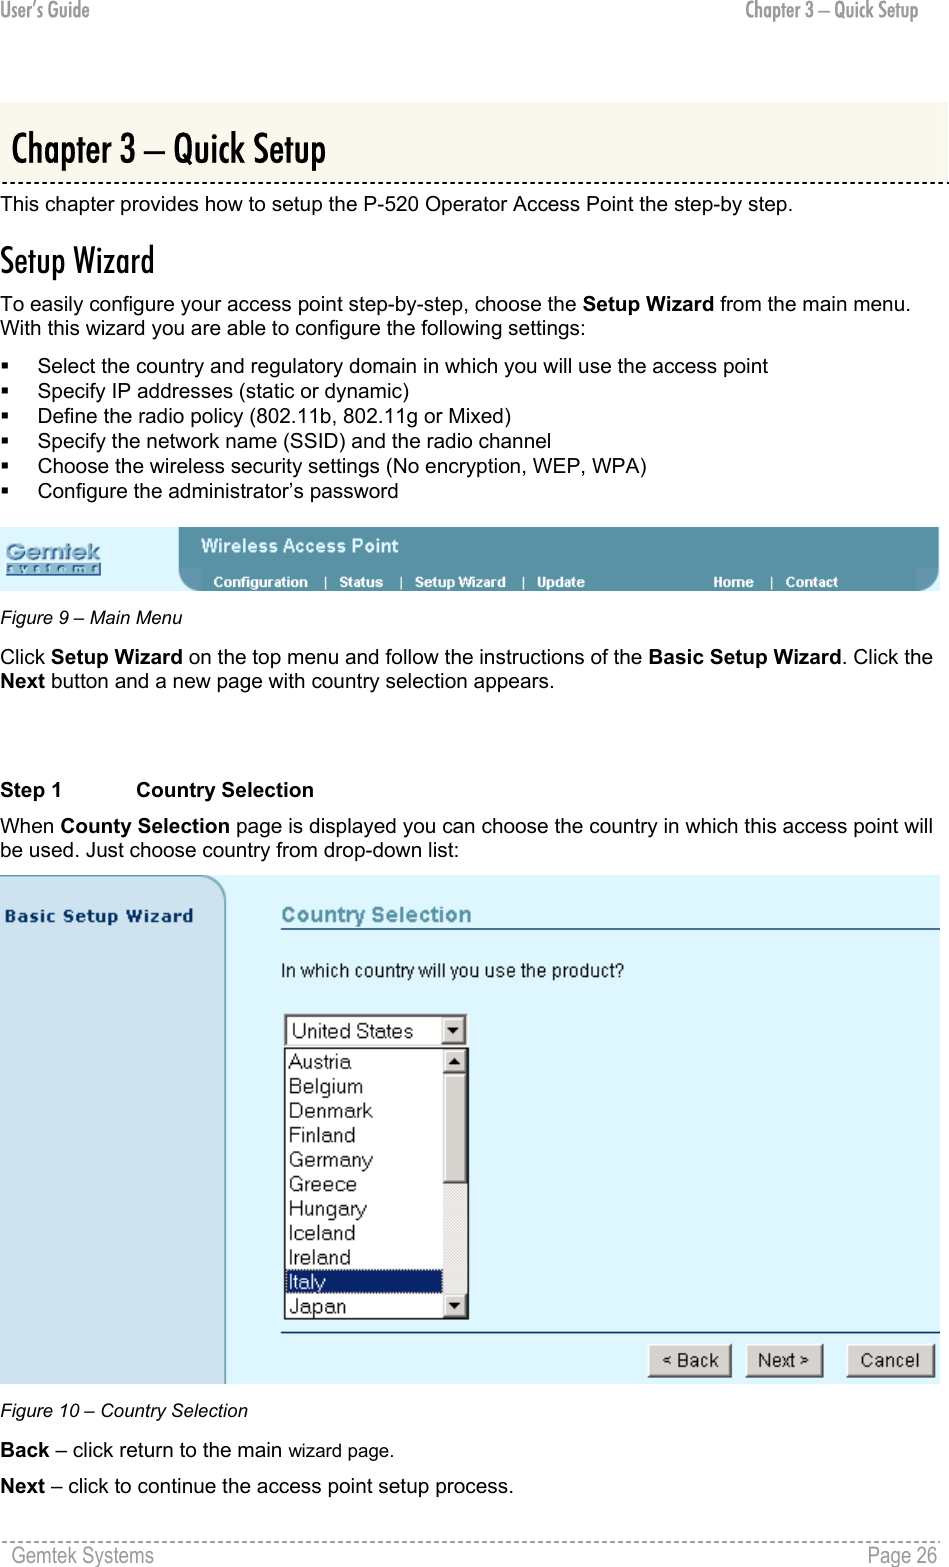 User’s Guide  Chapter 3 – Quick Setup  Chapter 3 – Quick Setup This chapter provides how to setup the P-520 Operator Access Point the step-by step. Setup Wizard To easily configure your access point step-by-step, choose the Setup Wizard from the main menu. With this wizard you are able to configure the following settings:   Select the country and regulatory domain in which you will use the access point   Specify IP addresses (static or dynamic)   Define the radio policy (802.11b, 802.11g or Mixed)   Specify the network name (SSID) and the radio channel   Choose the wireless security settings (No encryption, WEP, WPA)   Configure the administrator’s password   Figure 9 – Main Menu Click Setup Wizard on the top menu and follow the instructions of the Basic Setup Wizard. Click the Next button and a new page with country selection appears.   Step 1  Country Selection When County Selection page is displayed you can choose the country in which this access point will be used. Just choose country from drop-down list:  Figure 10 – Country Selection Back – click return to the main wizard page. Next – click to continue the access point setup process. Gemtek Systems    Page 26  